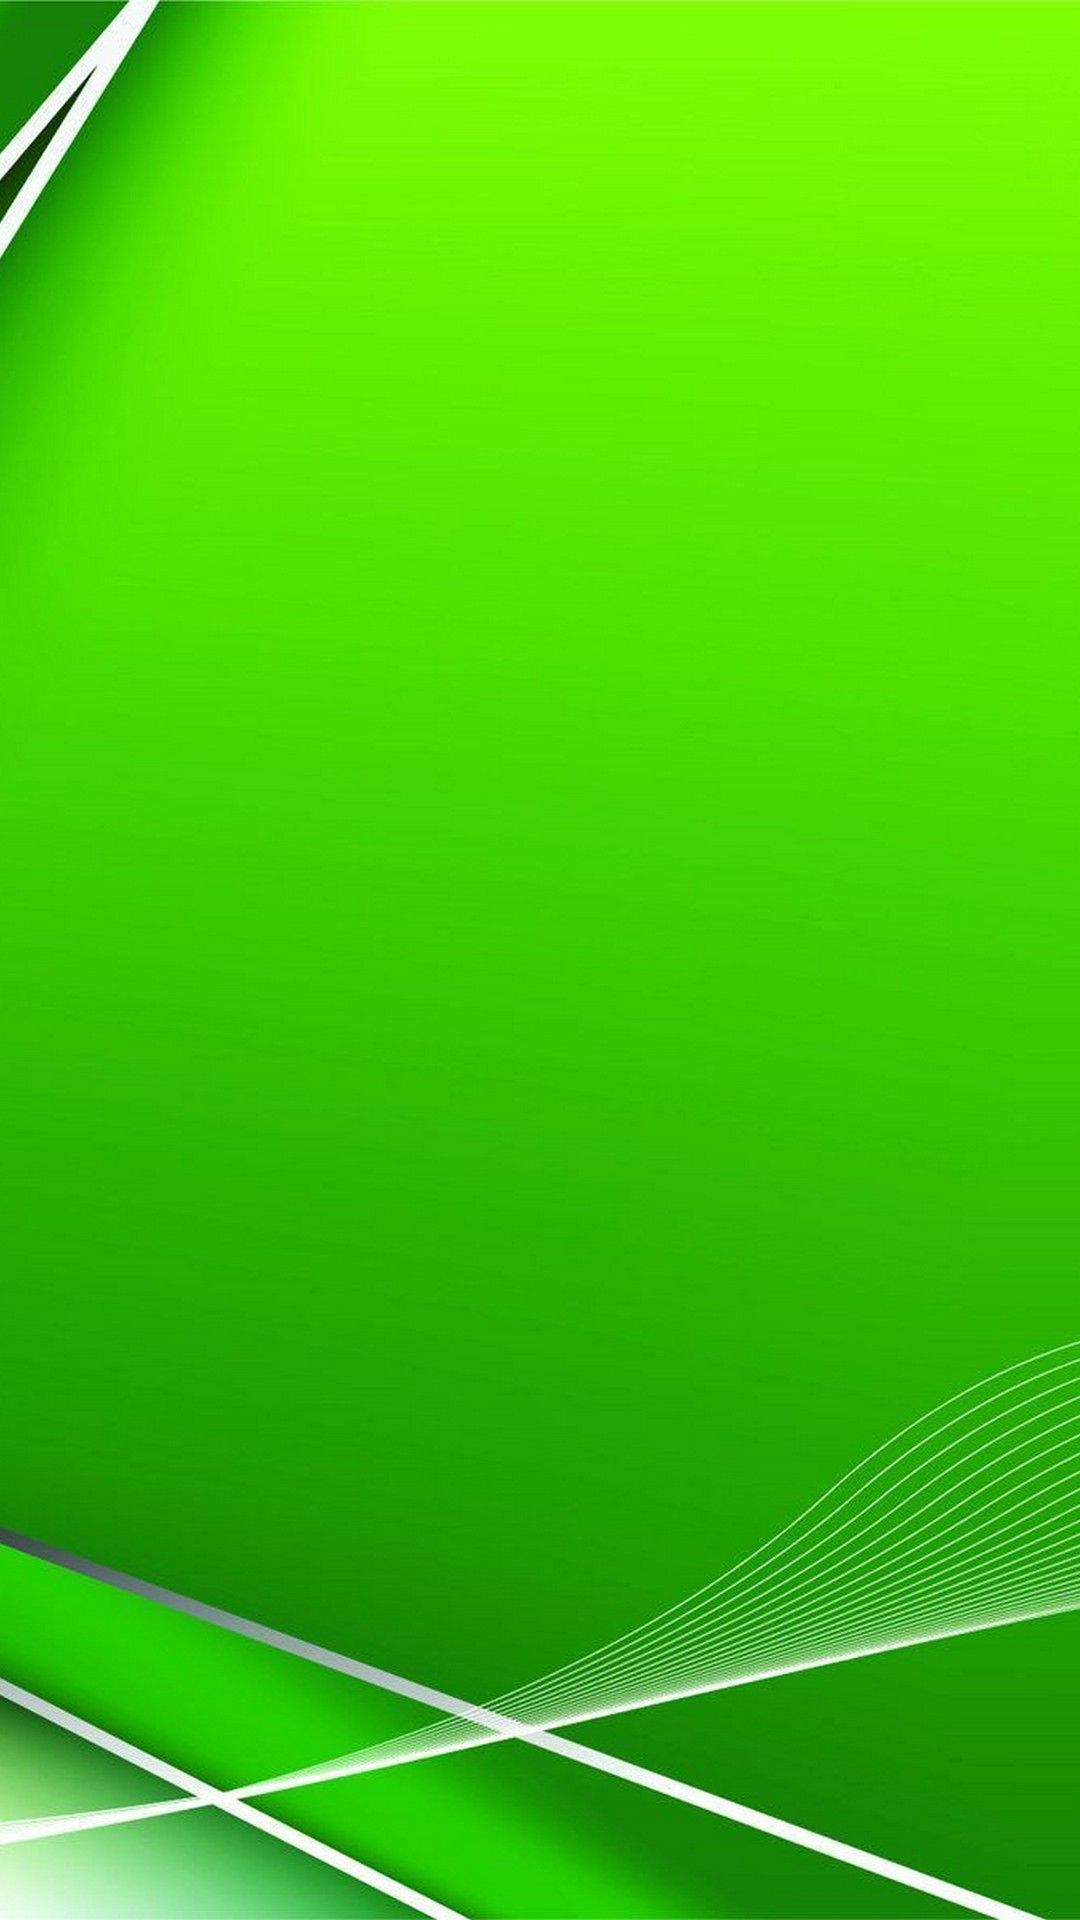 Wallpaper Android Neon Green Android Wallpaper